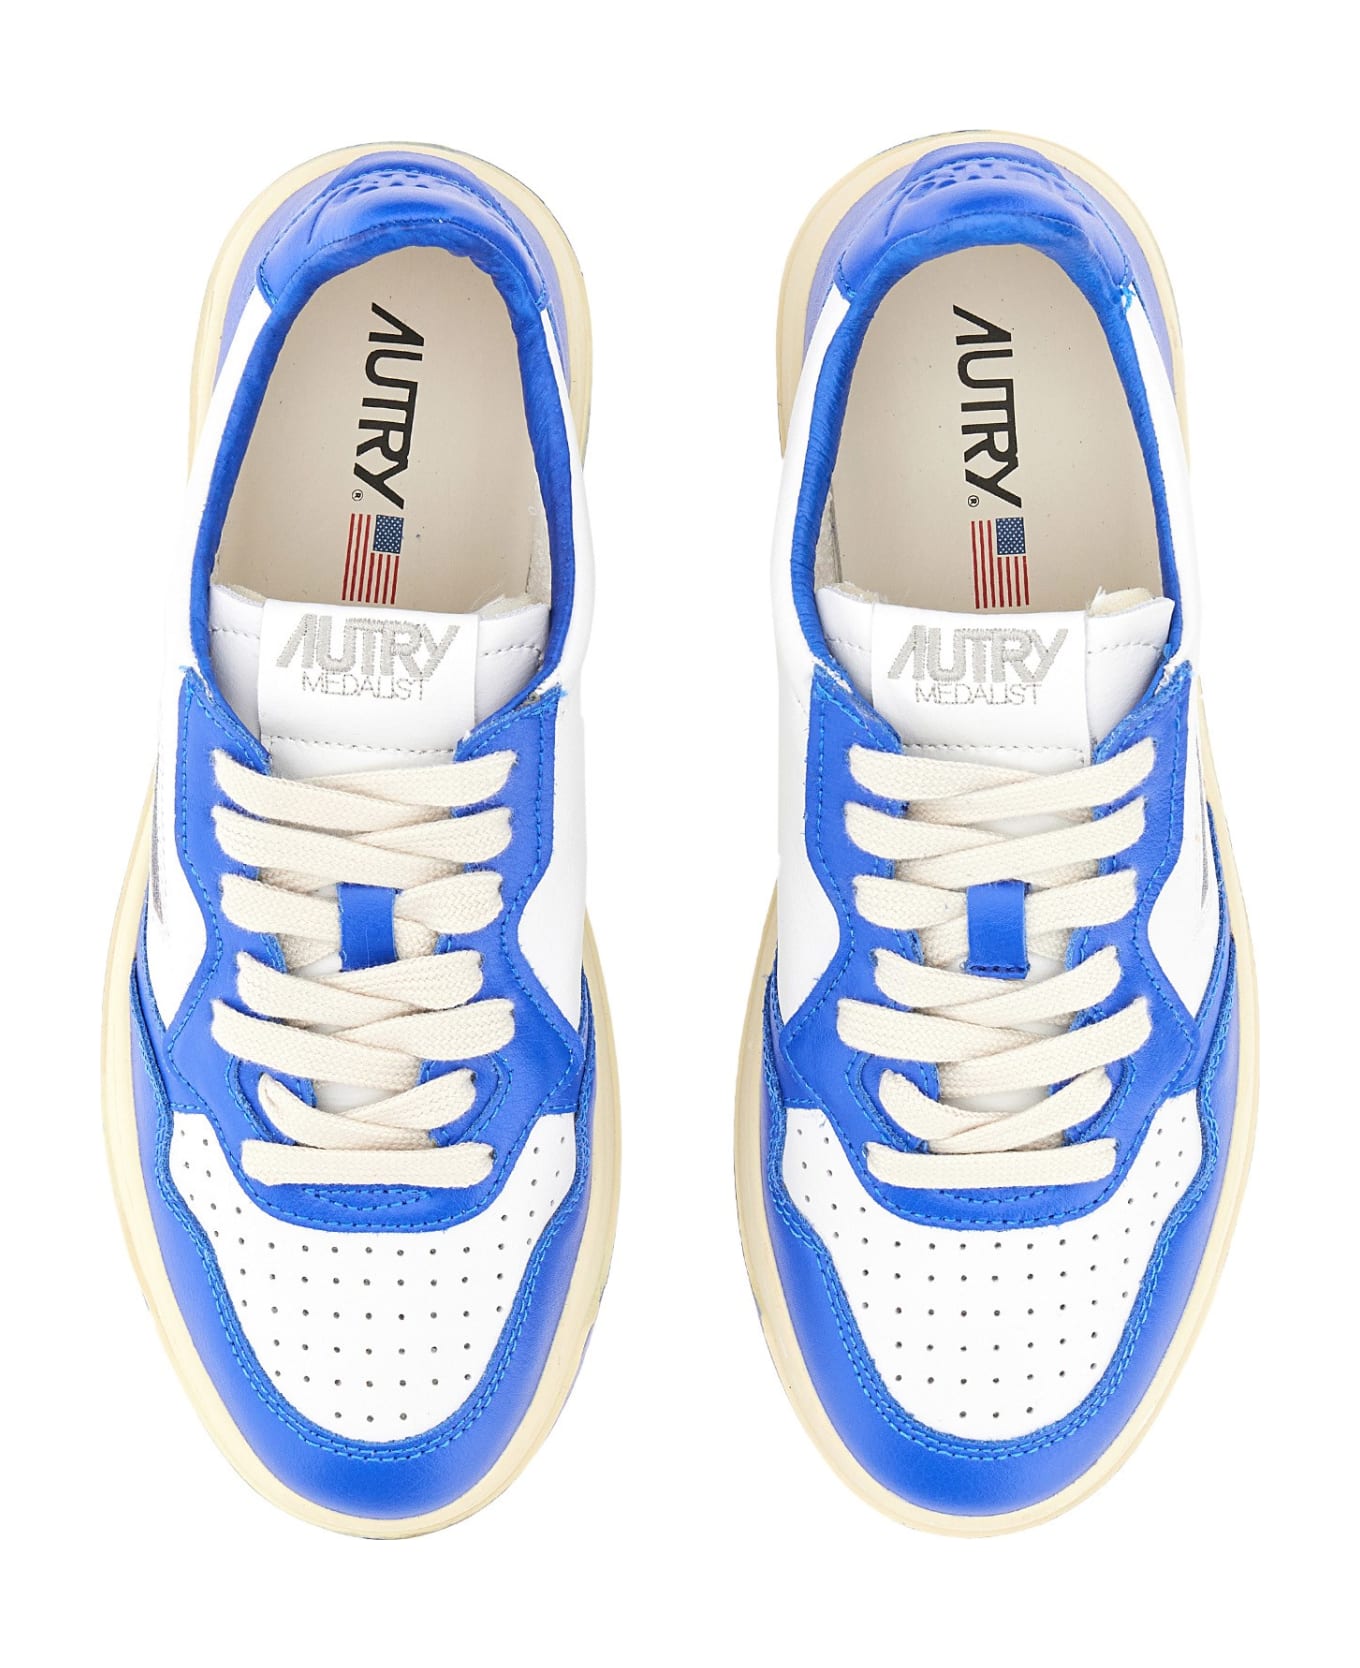 Autry Medalist Low Leather Sneakers - BLU スニーカー